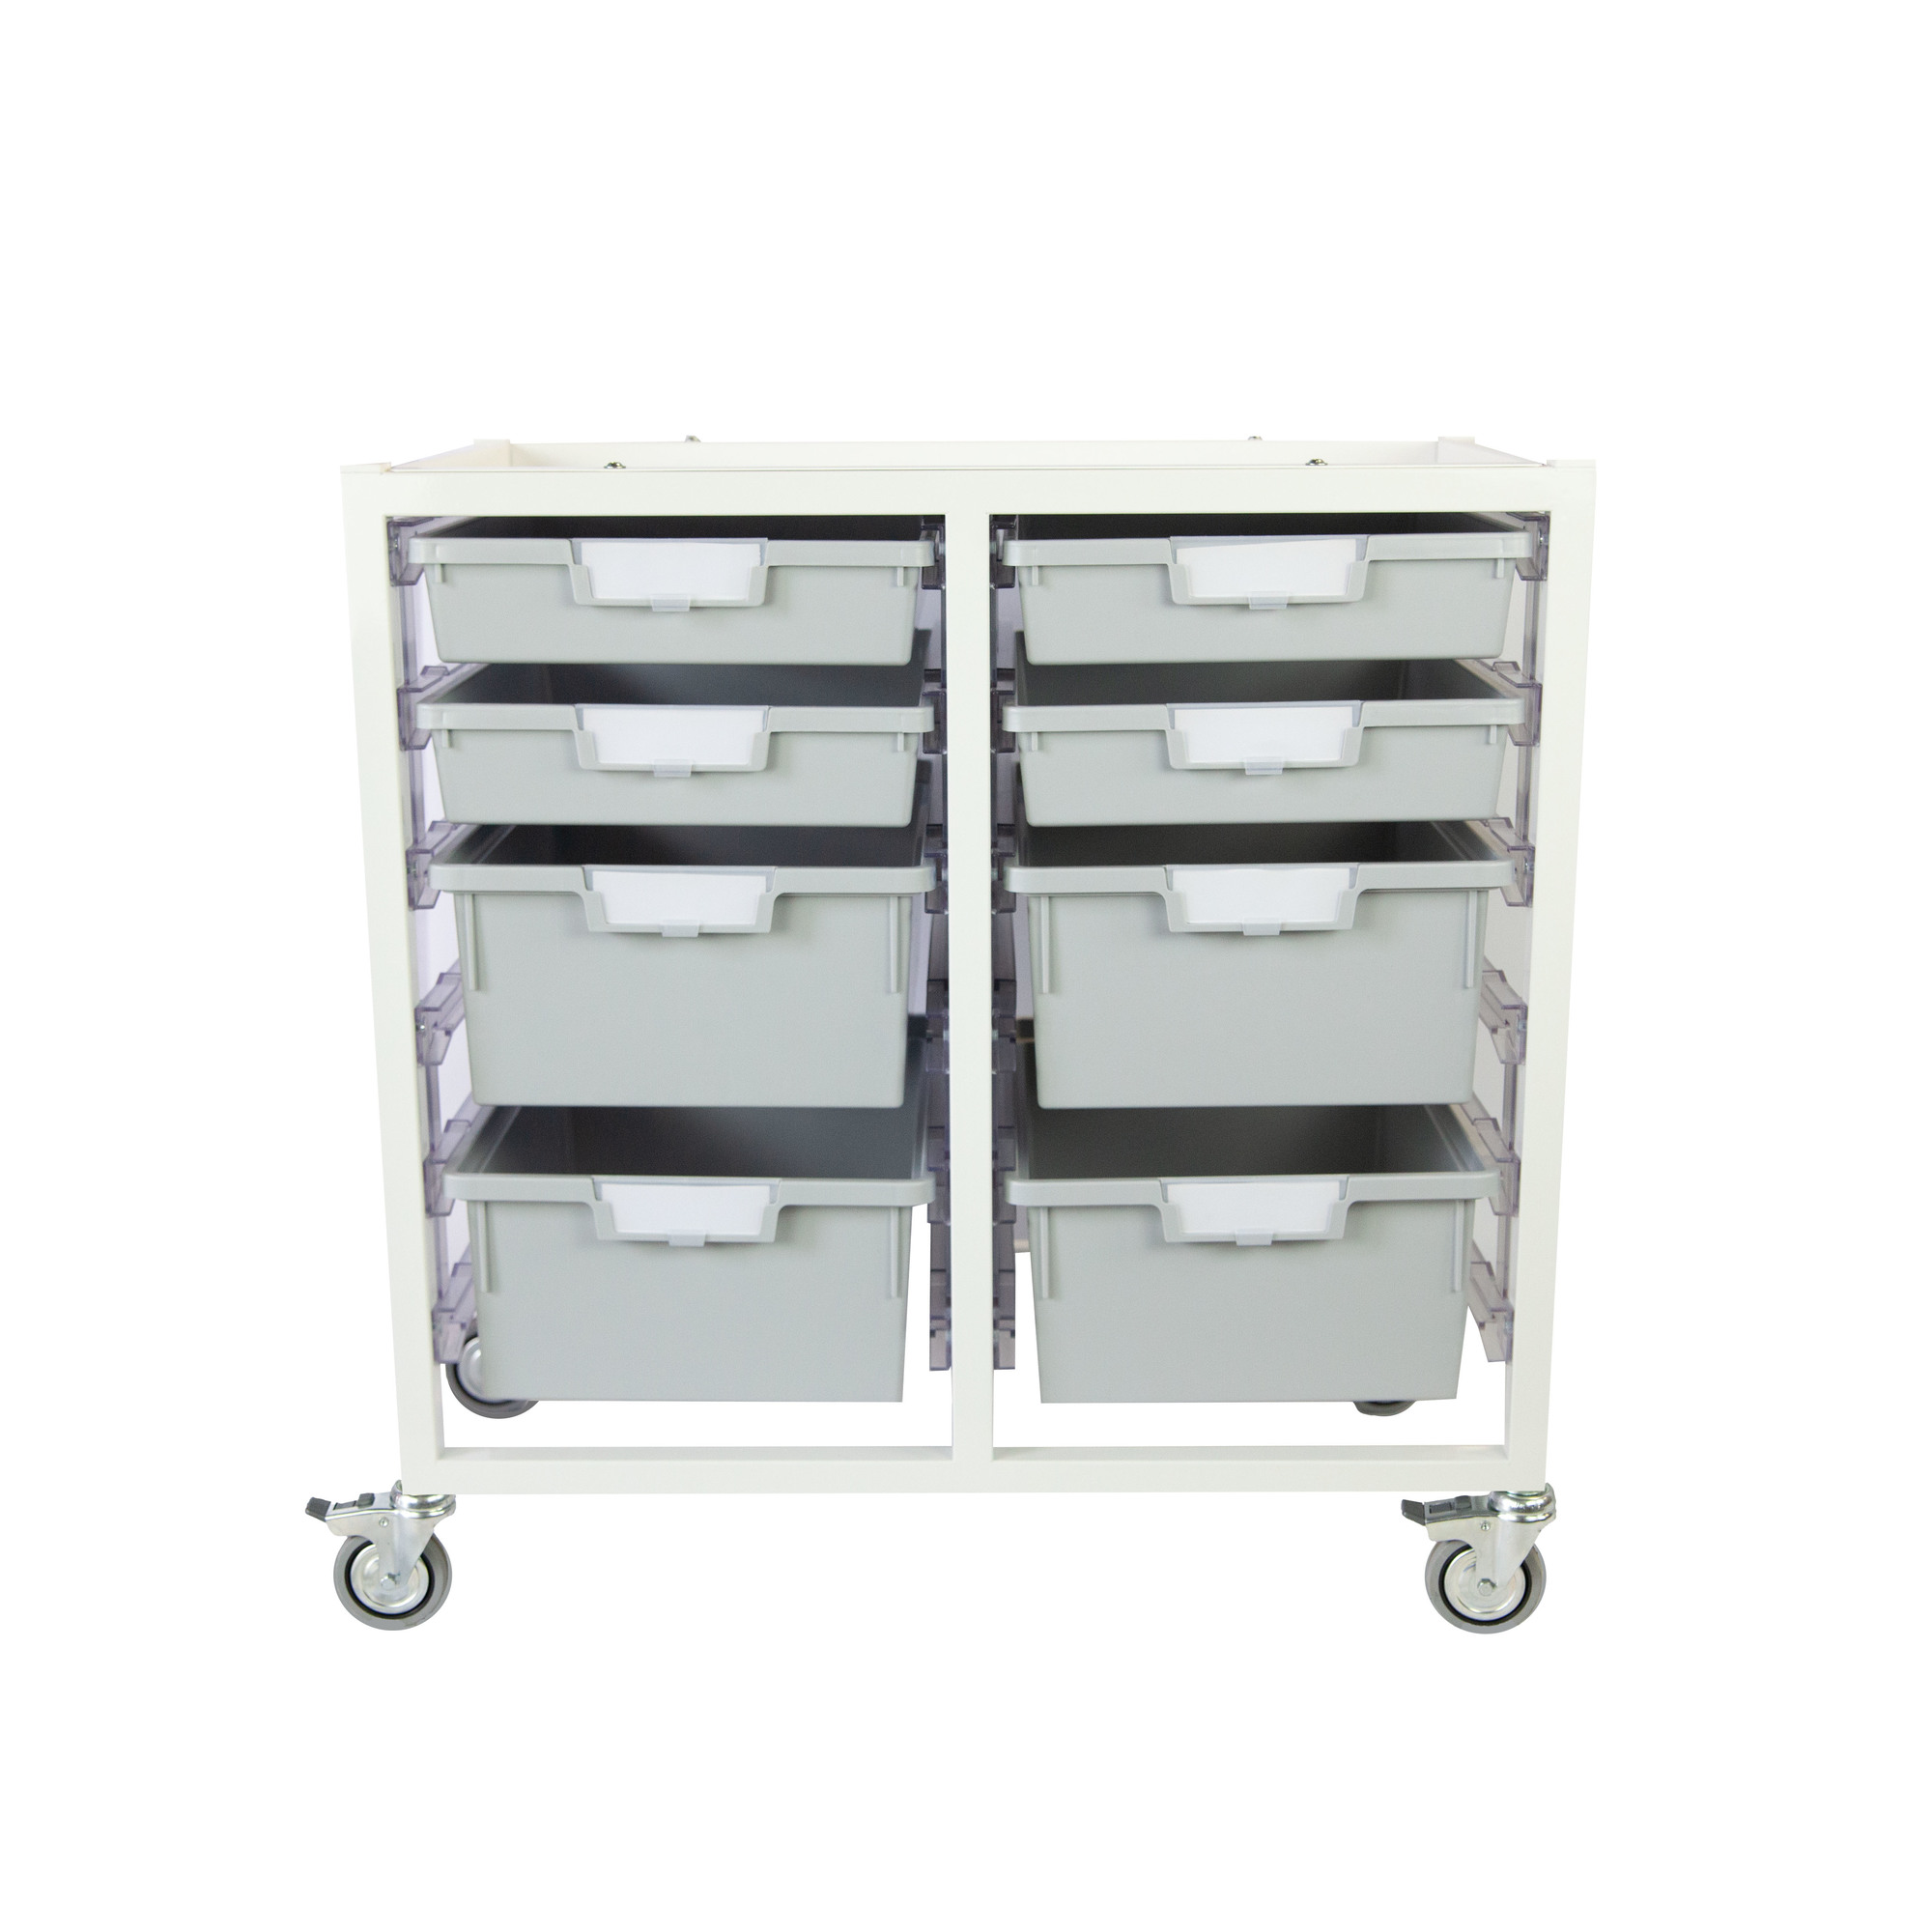 Certwood, Swift Cart Slim-White with 8 Gray Trays, Included (qty.) 1, Material Steel, Height 29.5 in, Model CE2101WH-4S4DLG